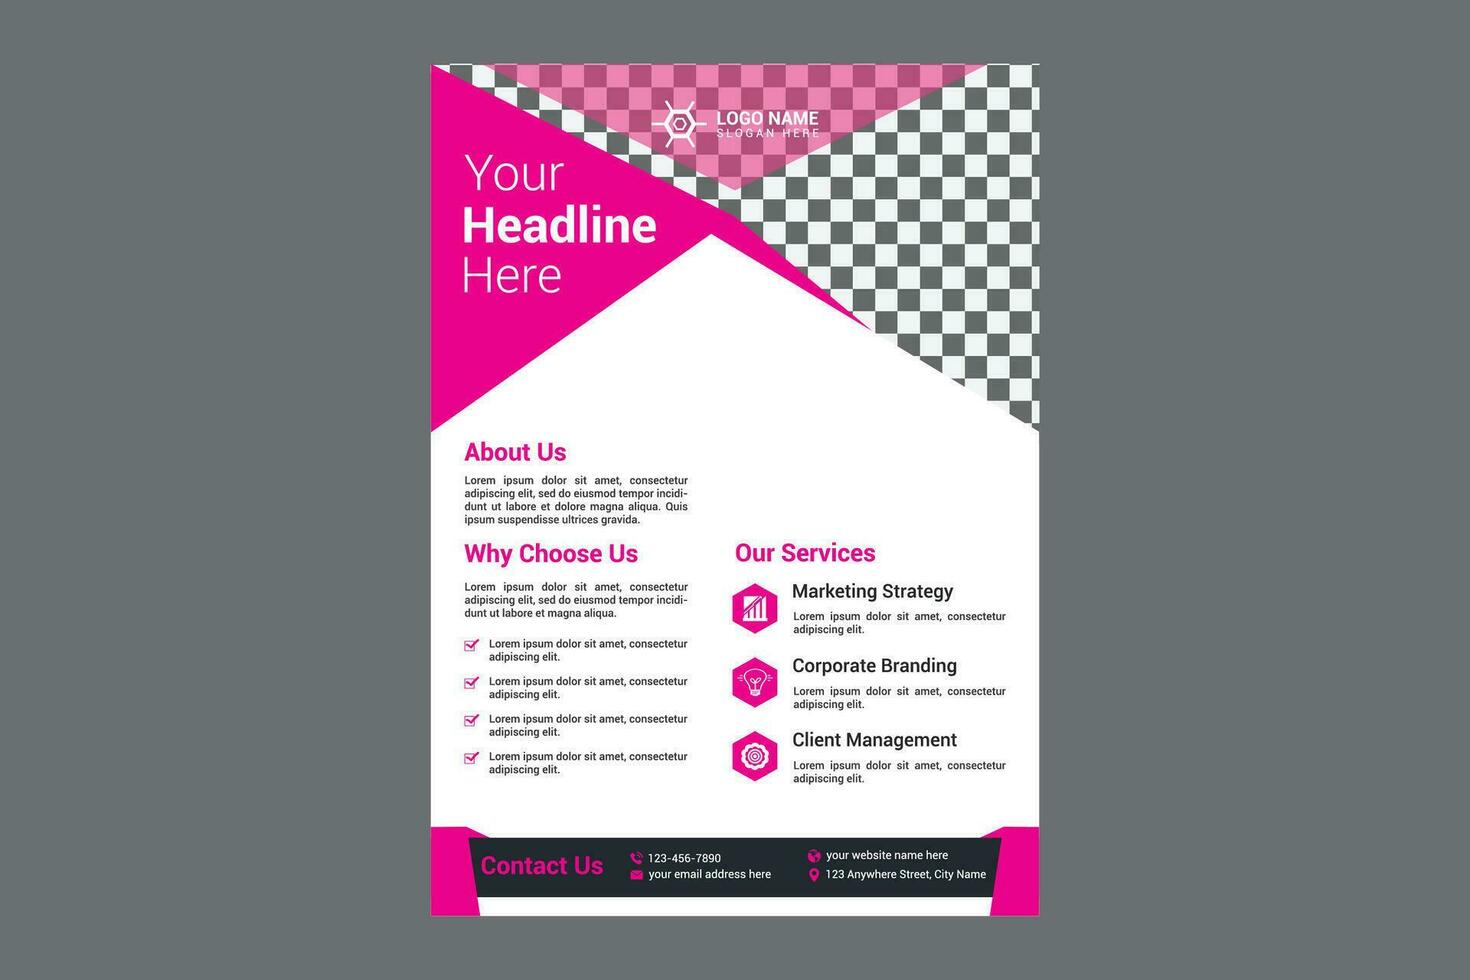 Set of Annual report or business flyer template design vector